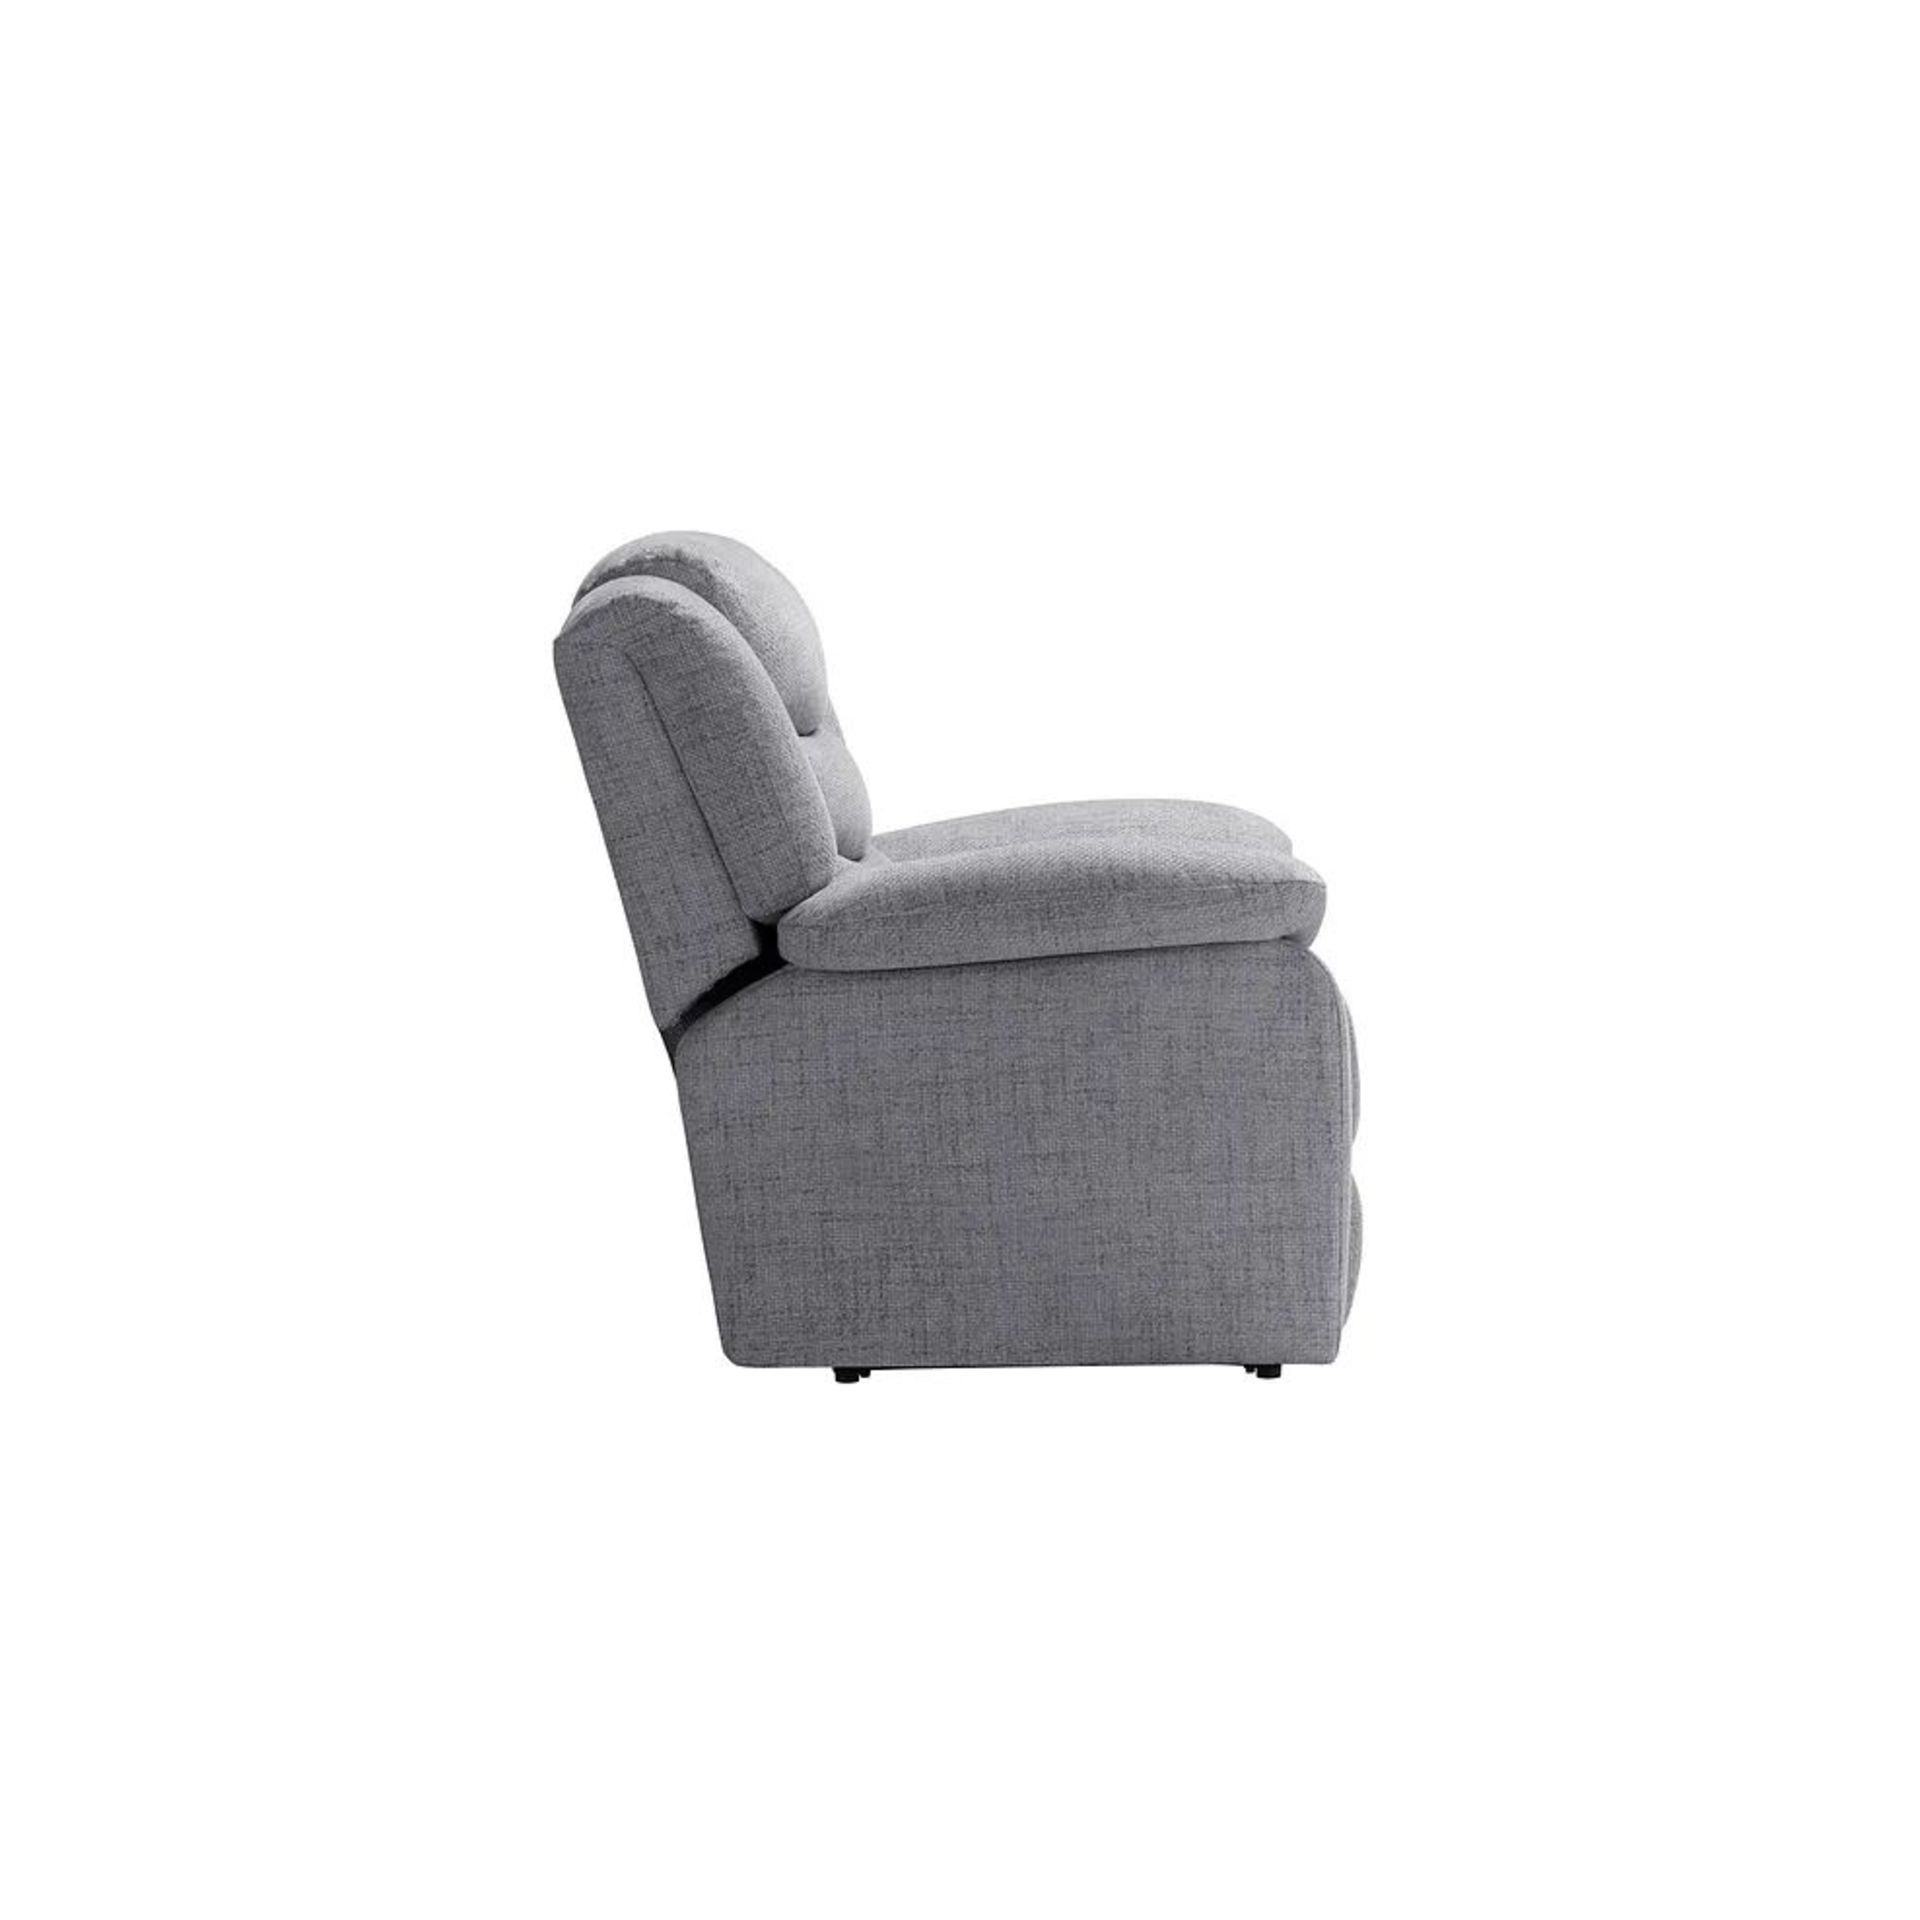 BRAND NEW MARLOW Armchair - SANTOS STEEL FABRIC. RRP £579. Designed to suit any home, our Marlow - Image 4 of 5